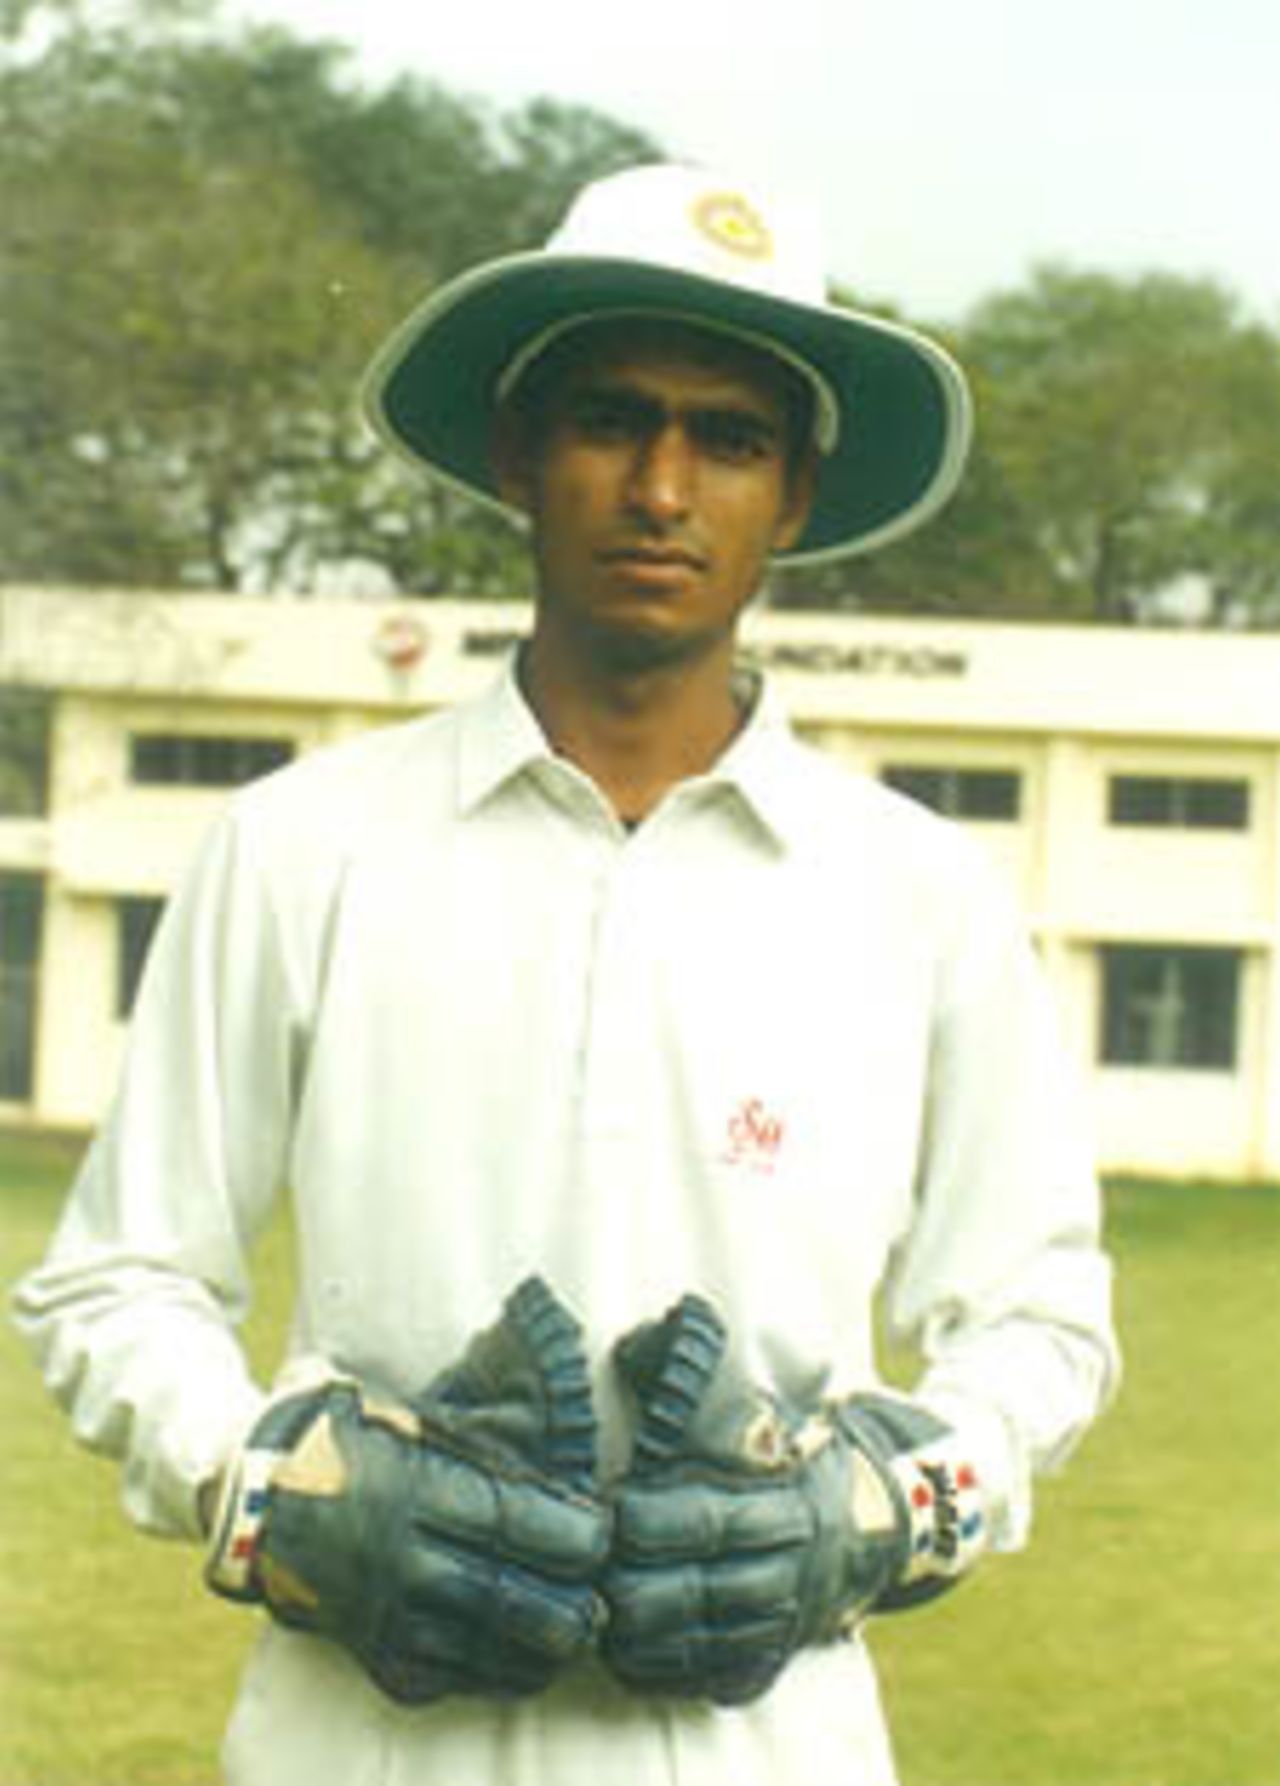 Ajay Ratra, the Indian U-19 wicket keeper, Pre-tournament camp at Chennai Jan 2000